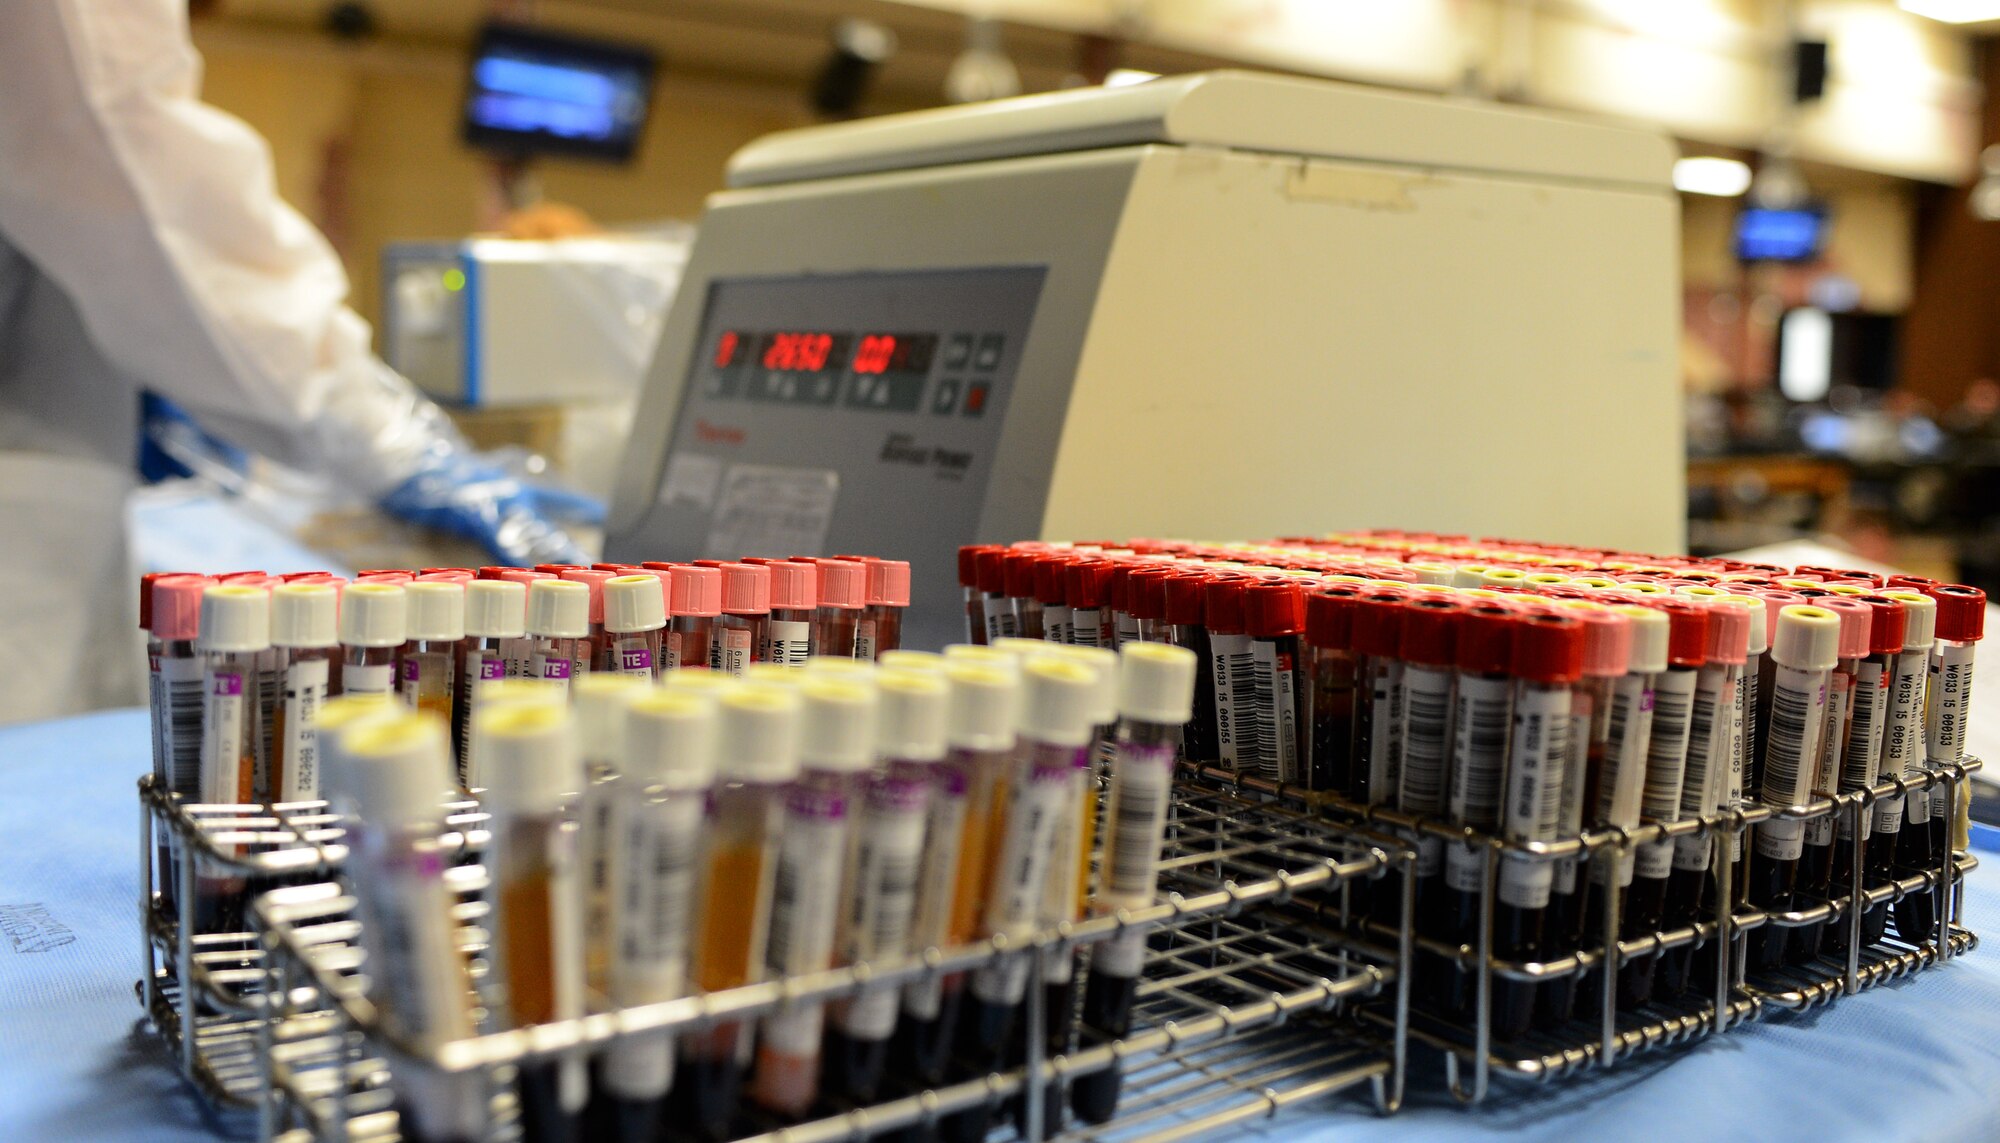 A Landstuhl Regional Medical Center laboratory technician arranges vials of blood during an Armed Services Blood Program blood drive at the Brick House in the community center on Spangdahlem Air Base, Germany, Jan. 20, 2015. The donated blood is sent to forward operating bases and military medical agencies around the world to continually support military blood transfusions. (U.S. Air Force photo by Airman 1st Class Luke Kitterman/Released)